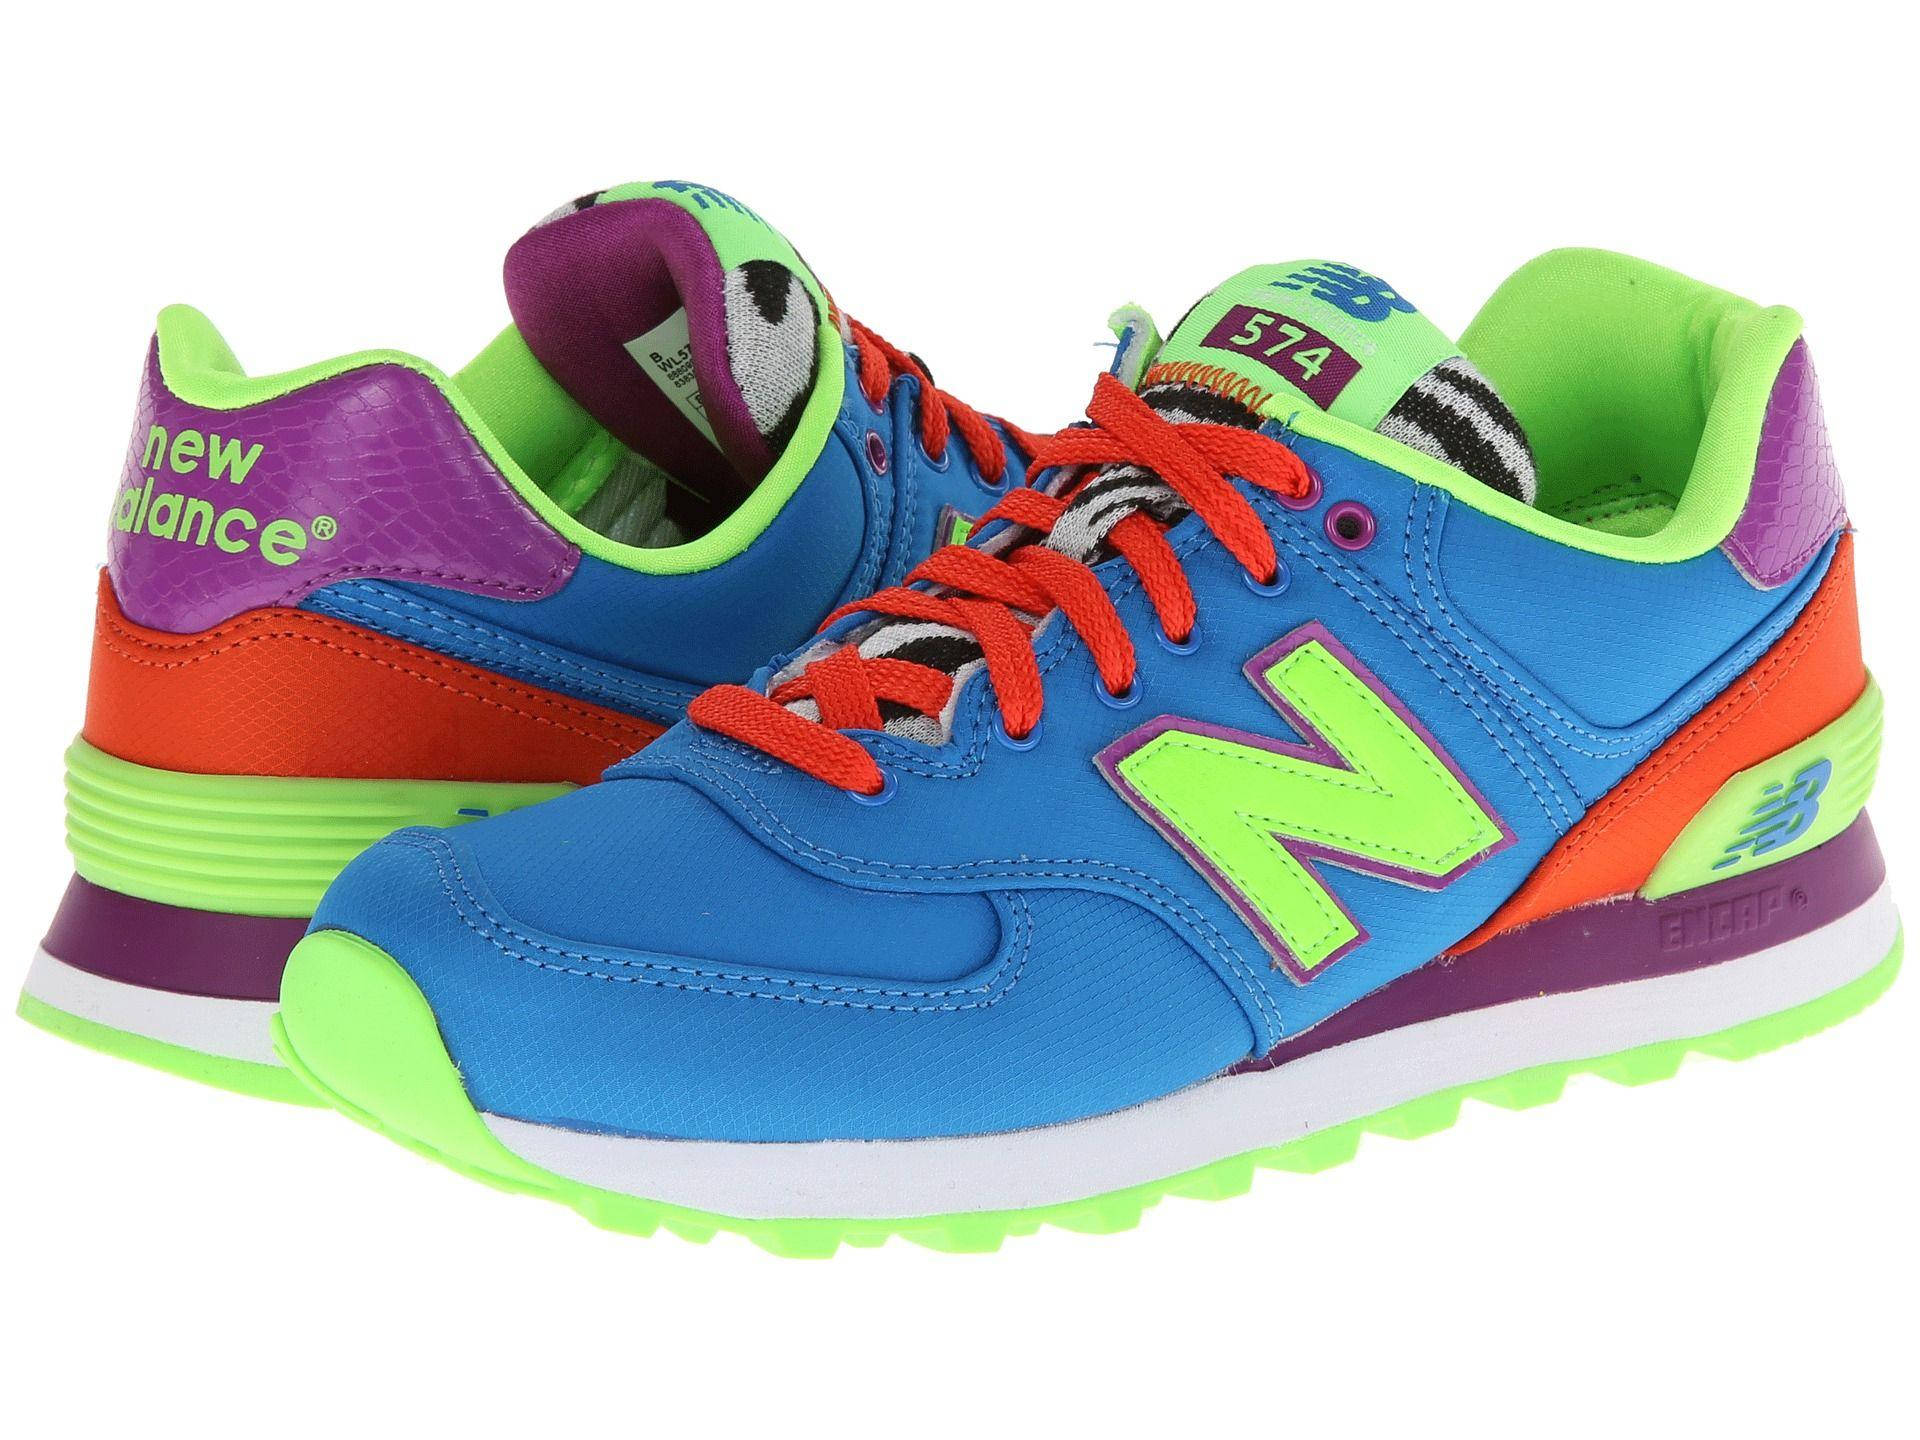 New Balance Neon Coloured Shoes